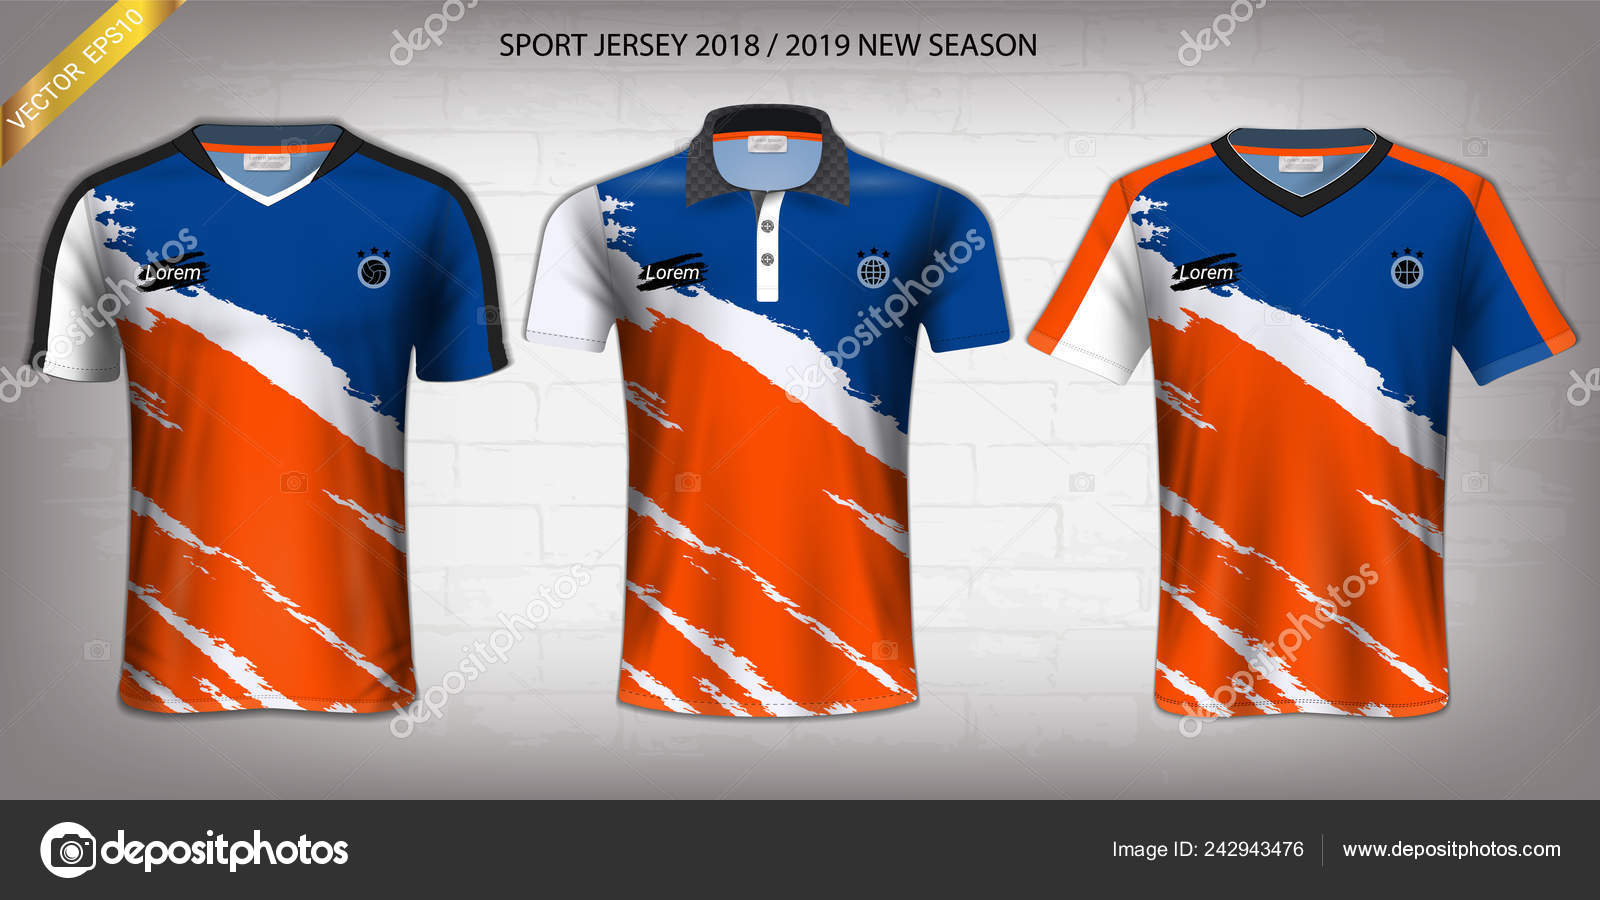 Download Soccer Jersey Shirt Sport Mockup Template Graphic Design Activewear Uniforms Vector Image By C Aioonrak Gmail Com Vector Stock 242943476